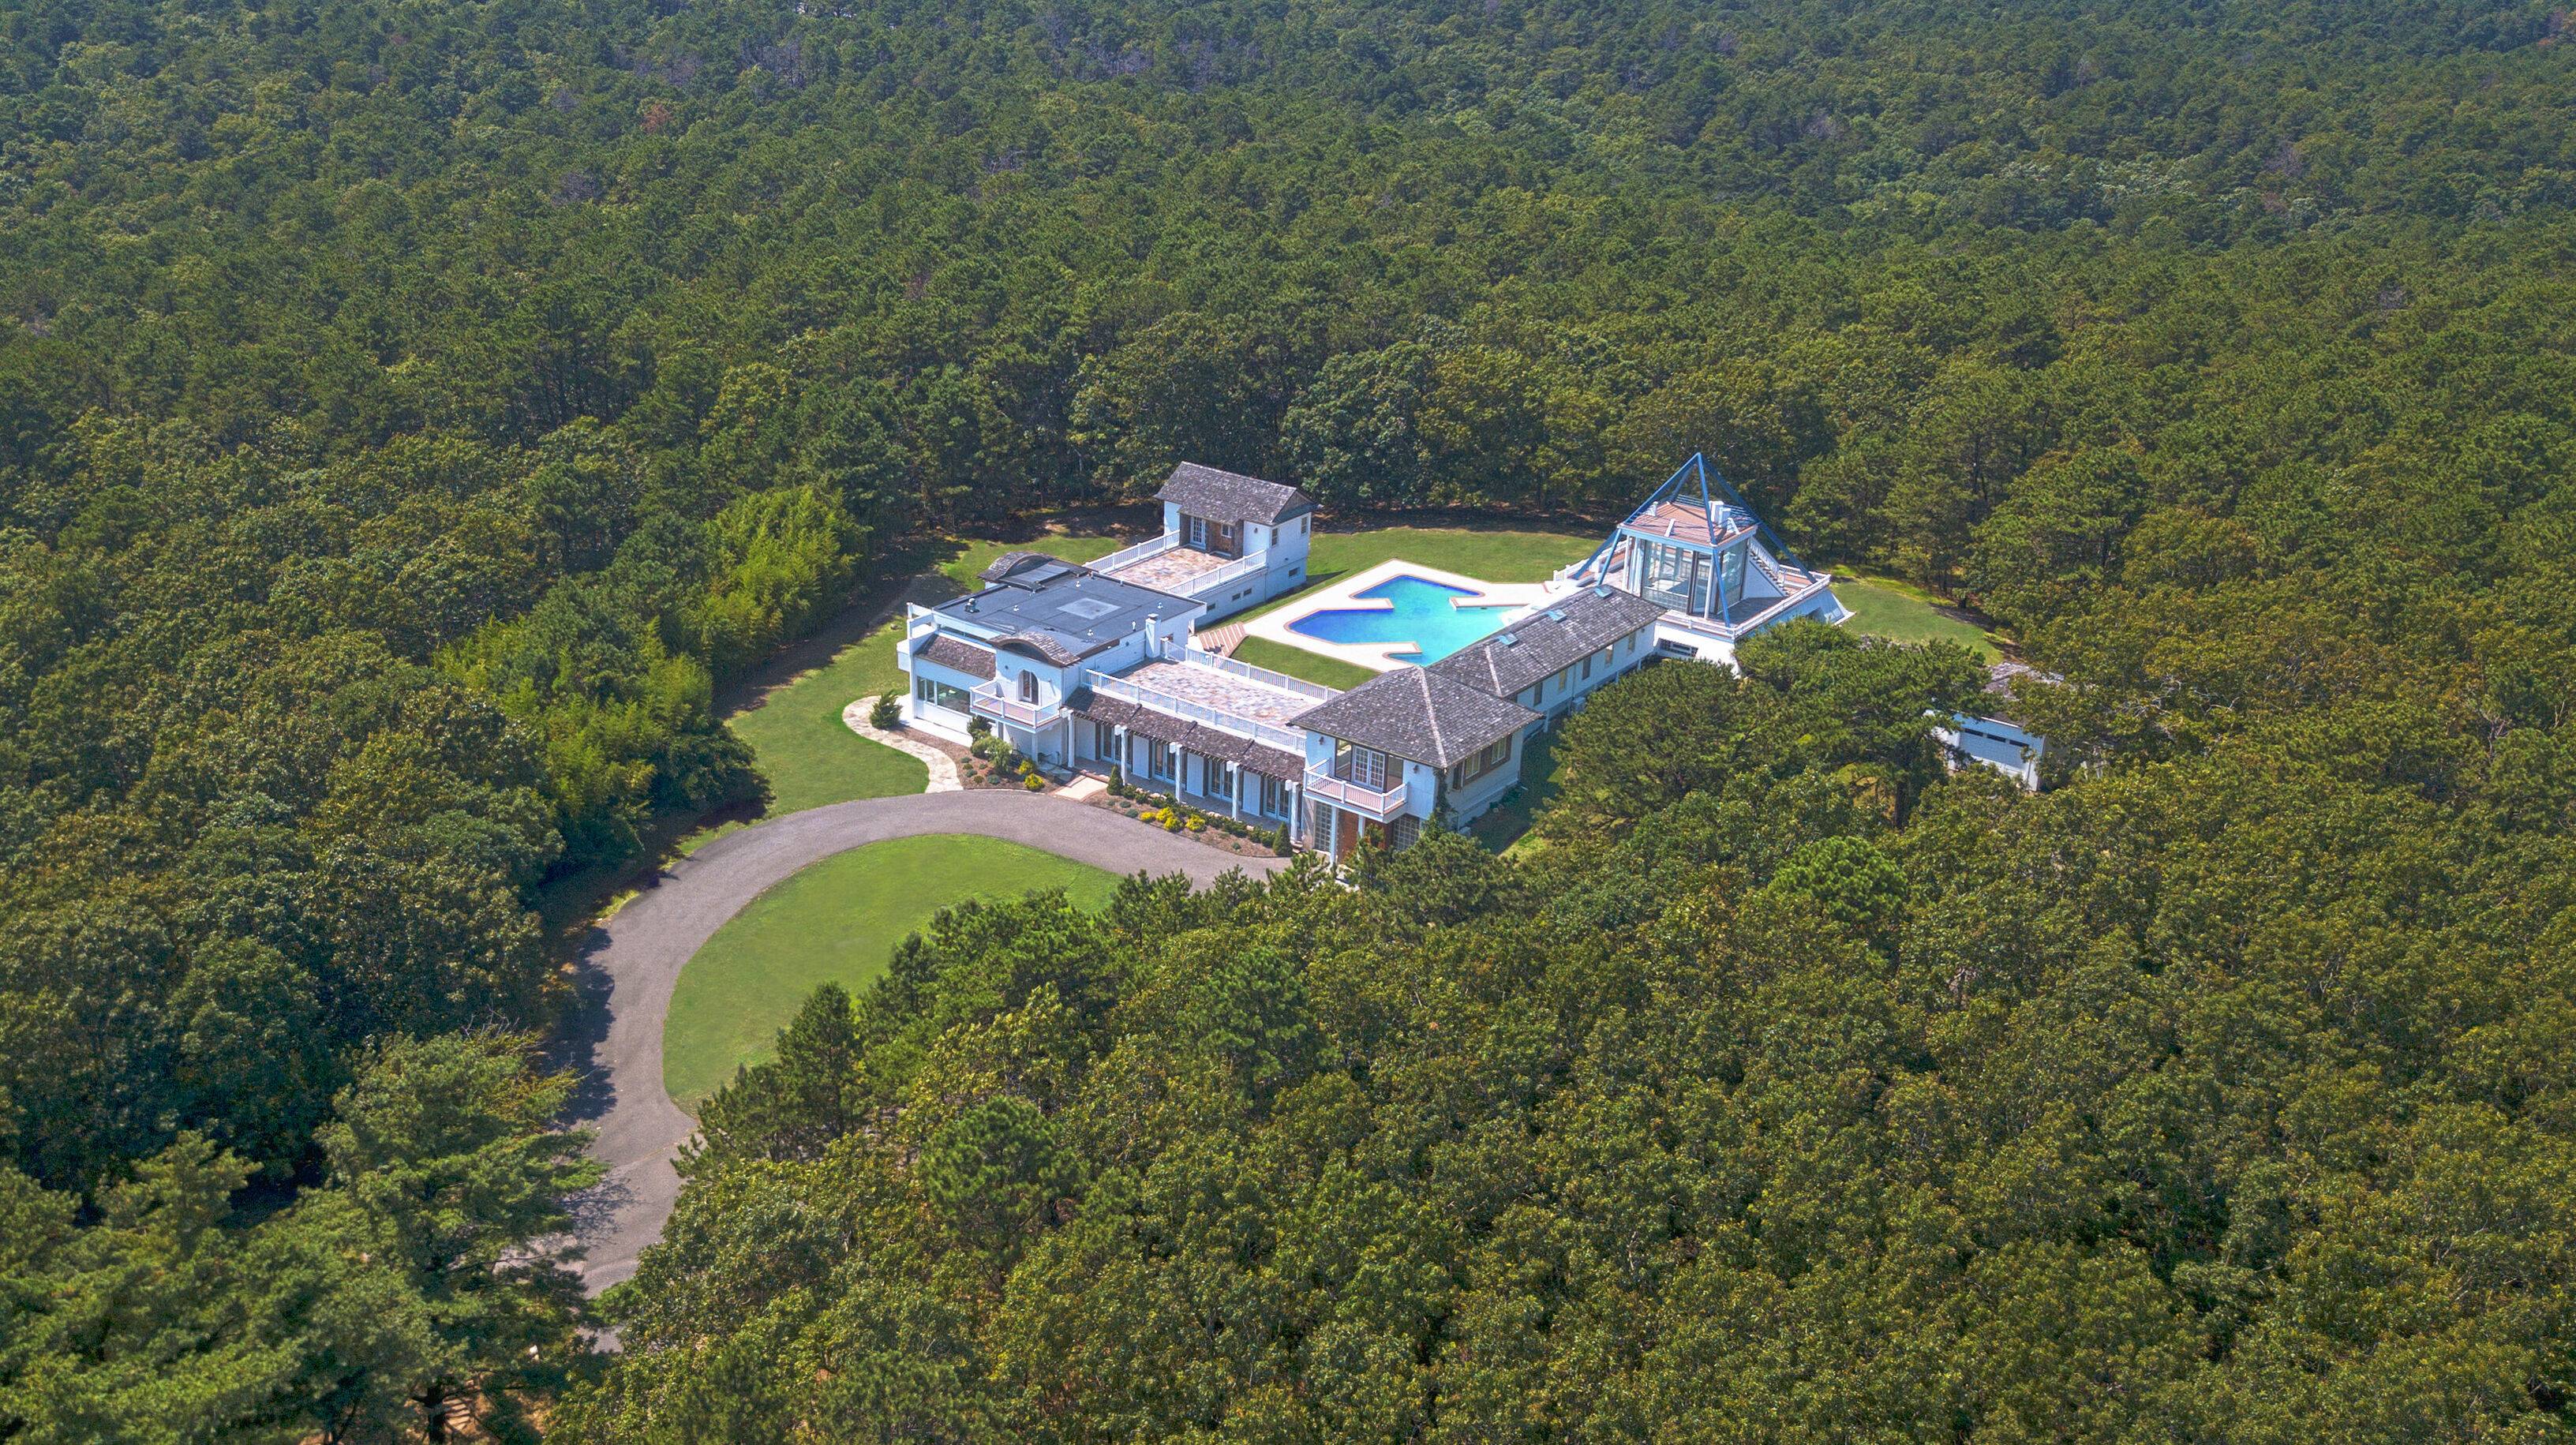 Island In The Sky - 12,000 Sq Ft Estate in Watermill, NY